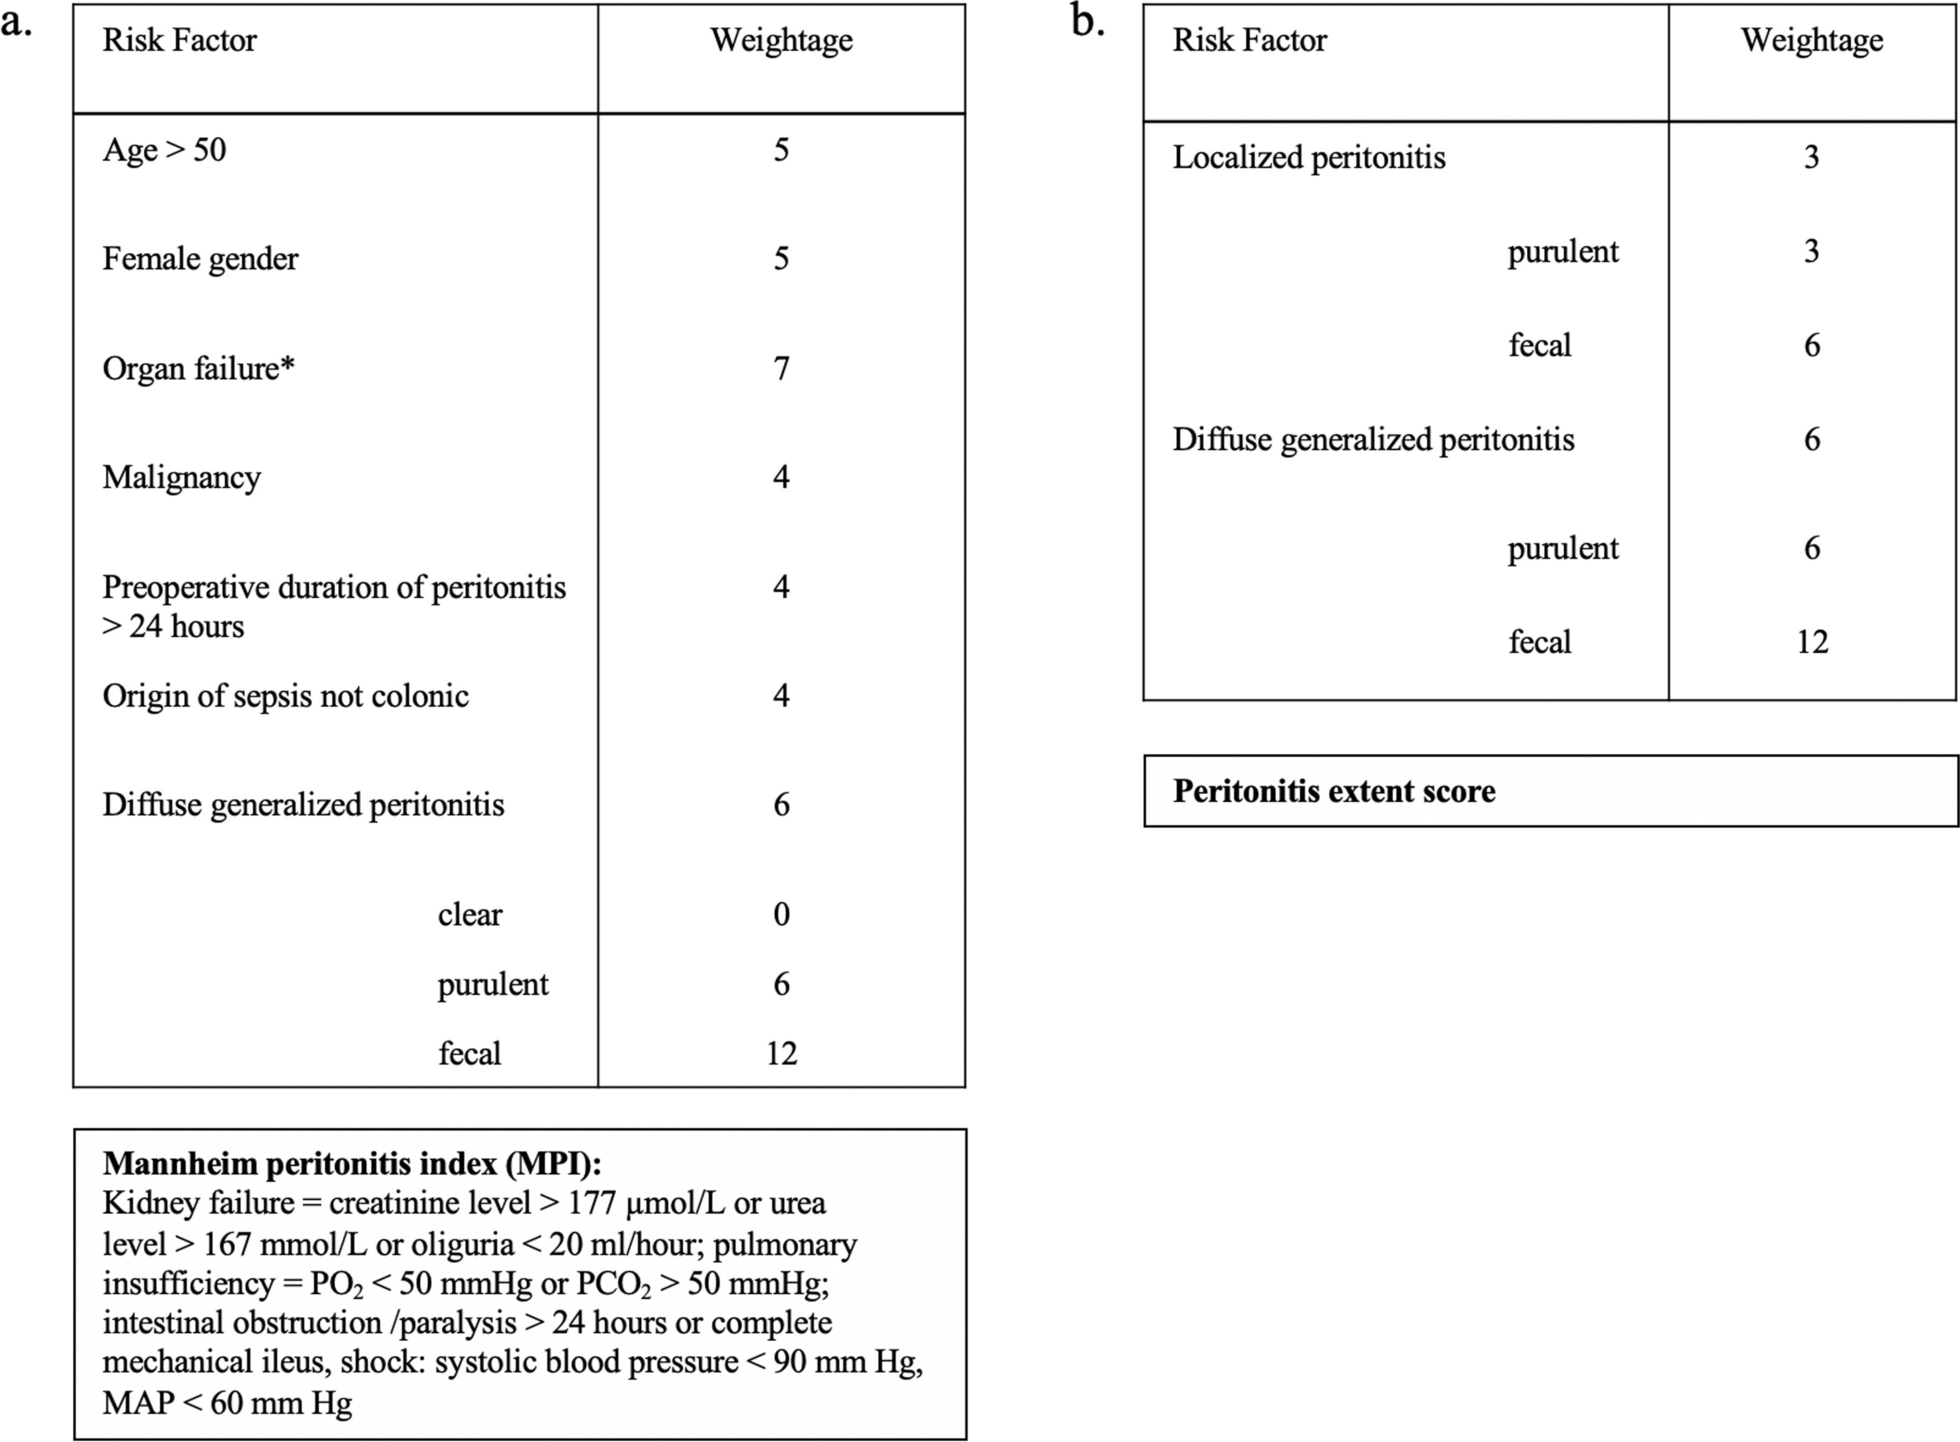 Reduced preoperative serum choline esterase levels and fecal peritoneal contamination as potential predictors for the leakage of intestinal sutures after source control in secondary peritonitis